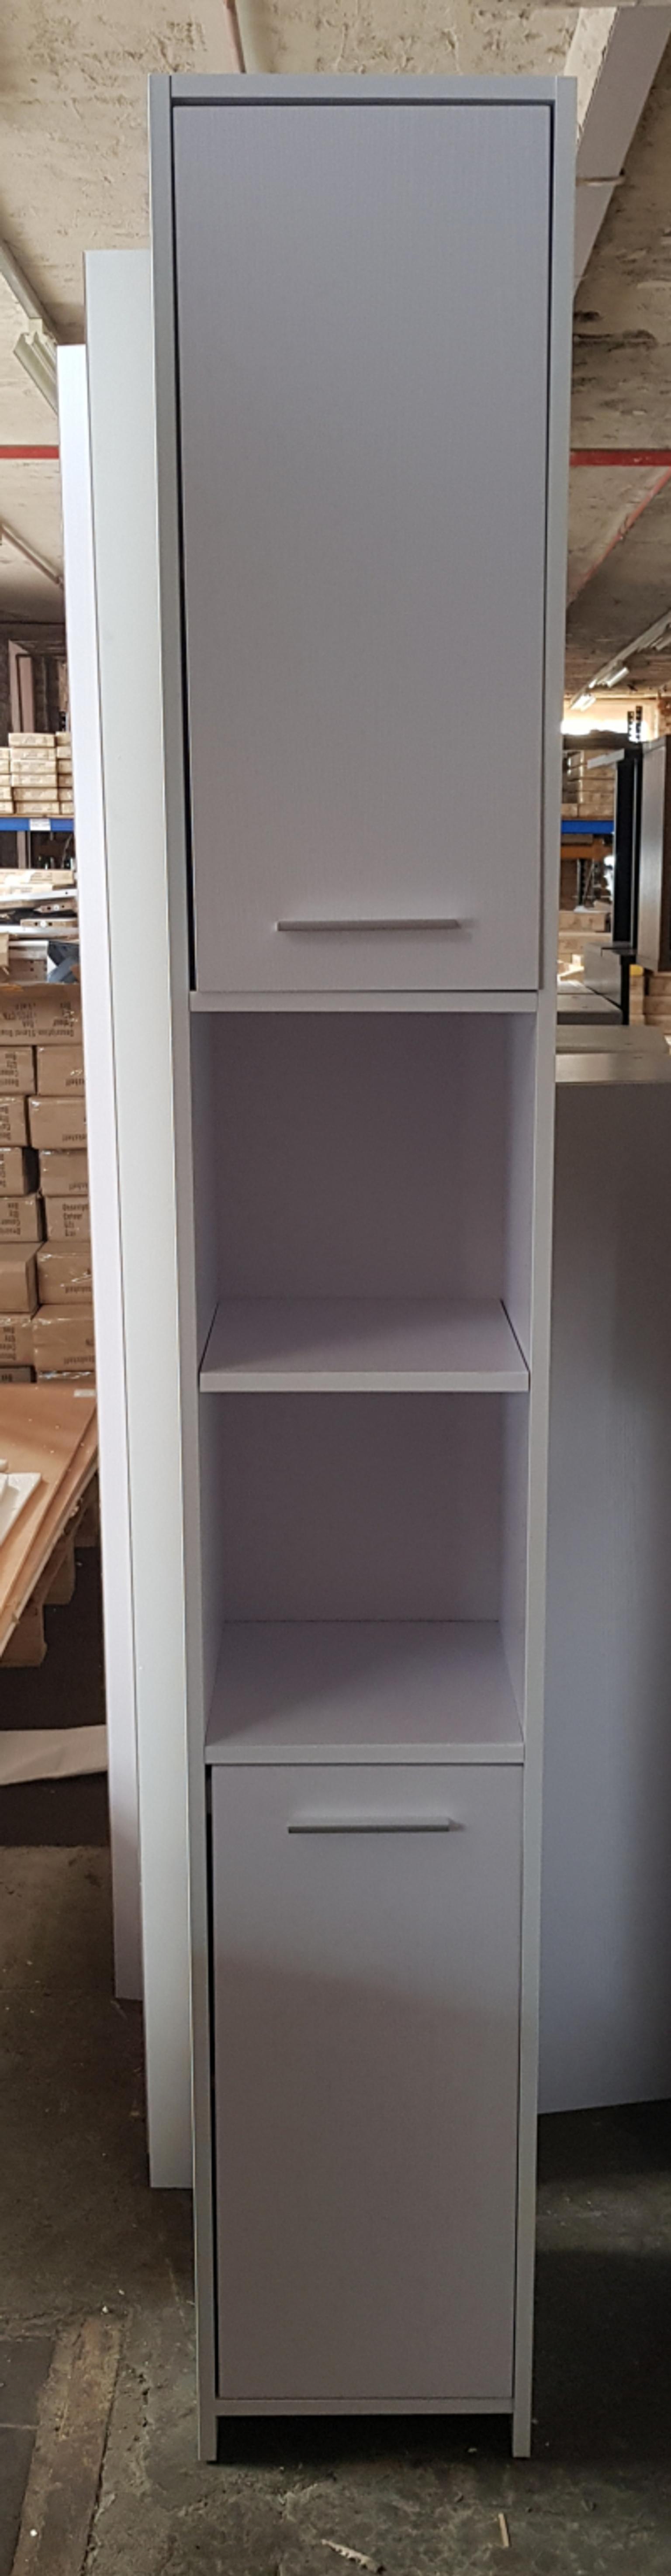 Tall Bathroom Cabinet For Colection In Ol12 Rochdale For 30 00